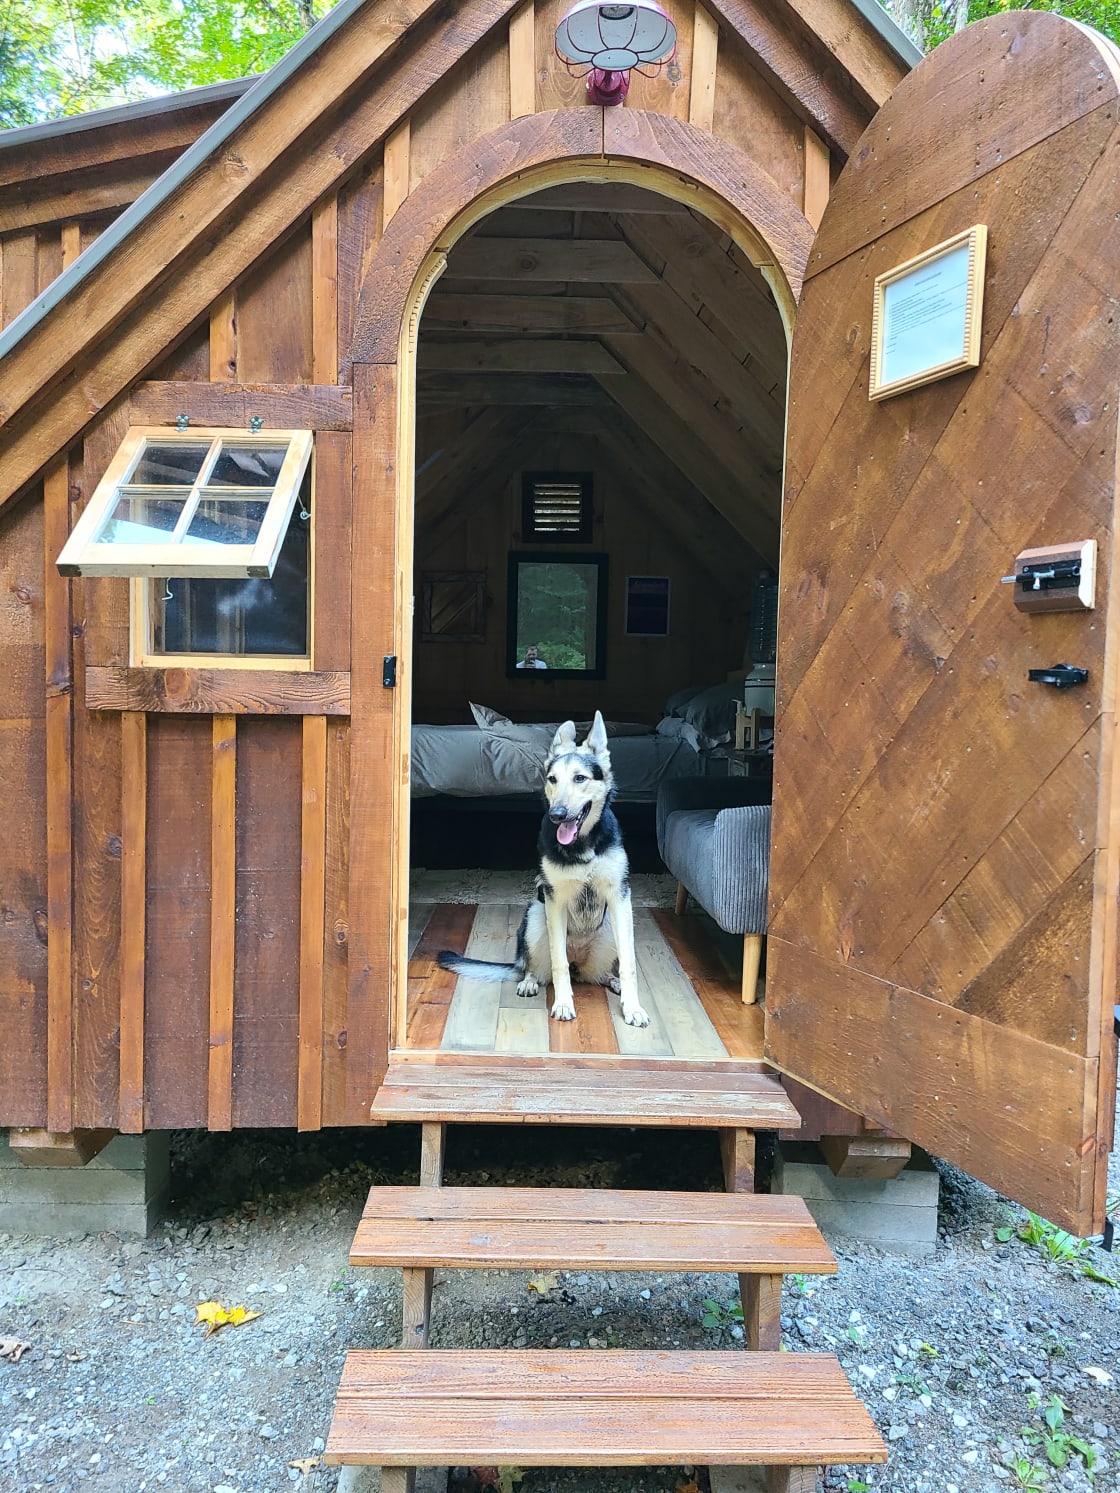 Our Dog in the Cabin!